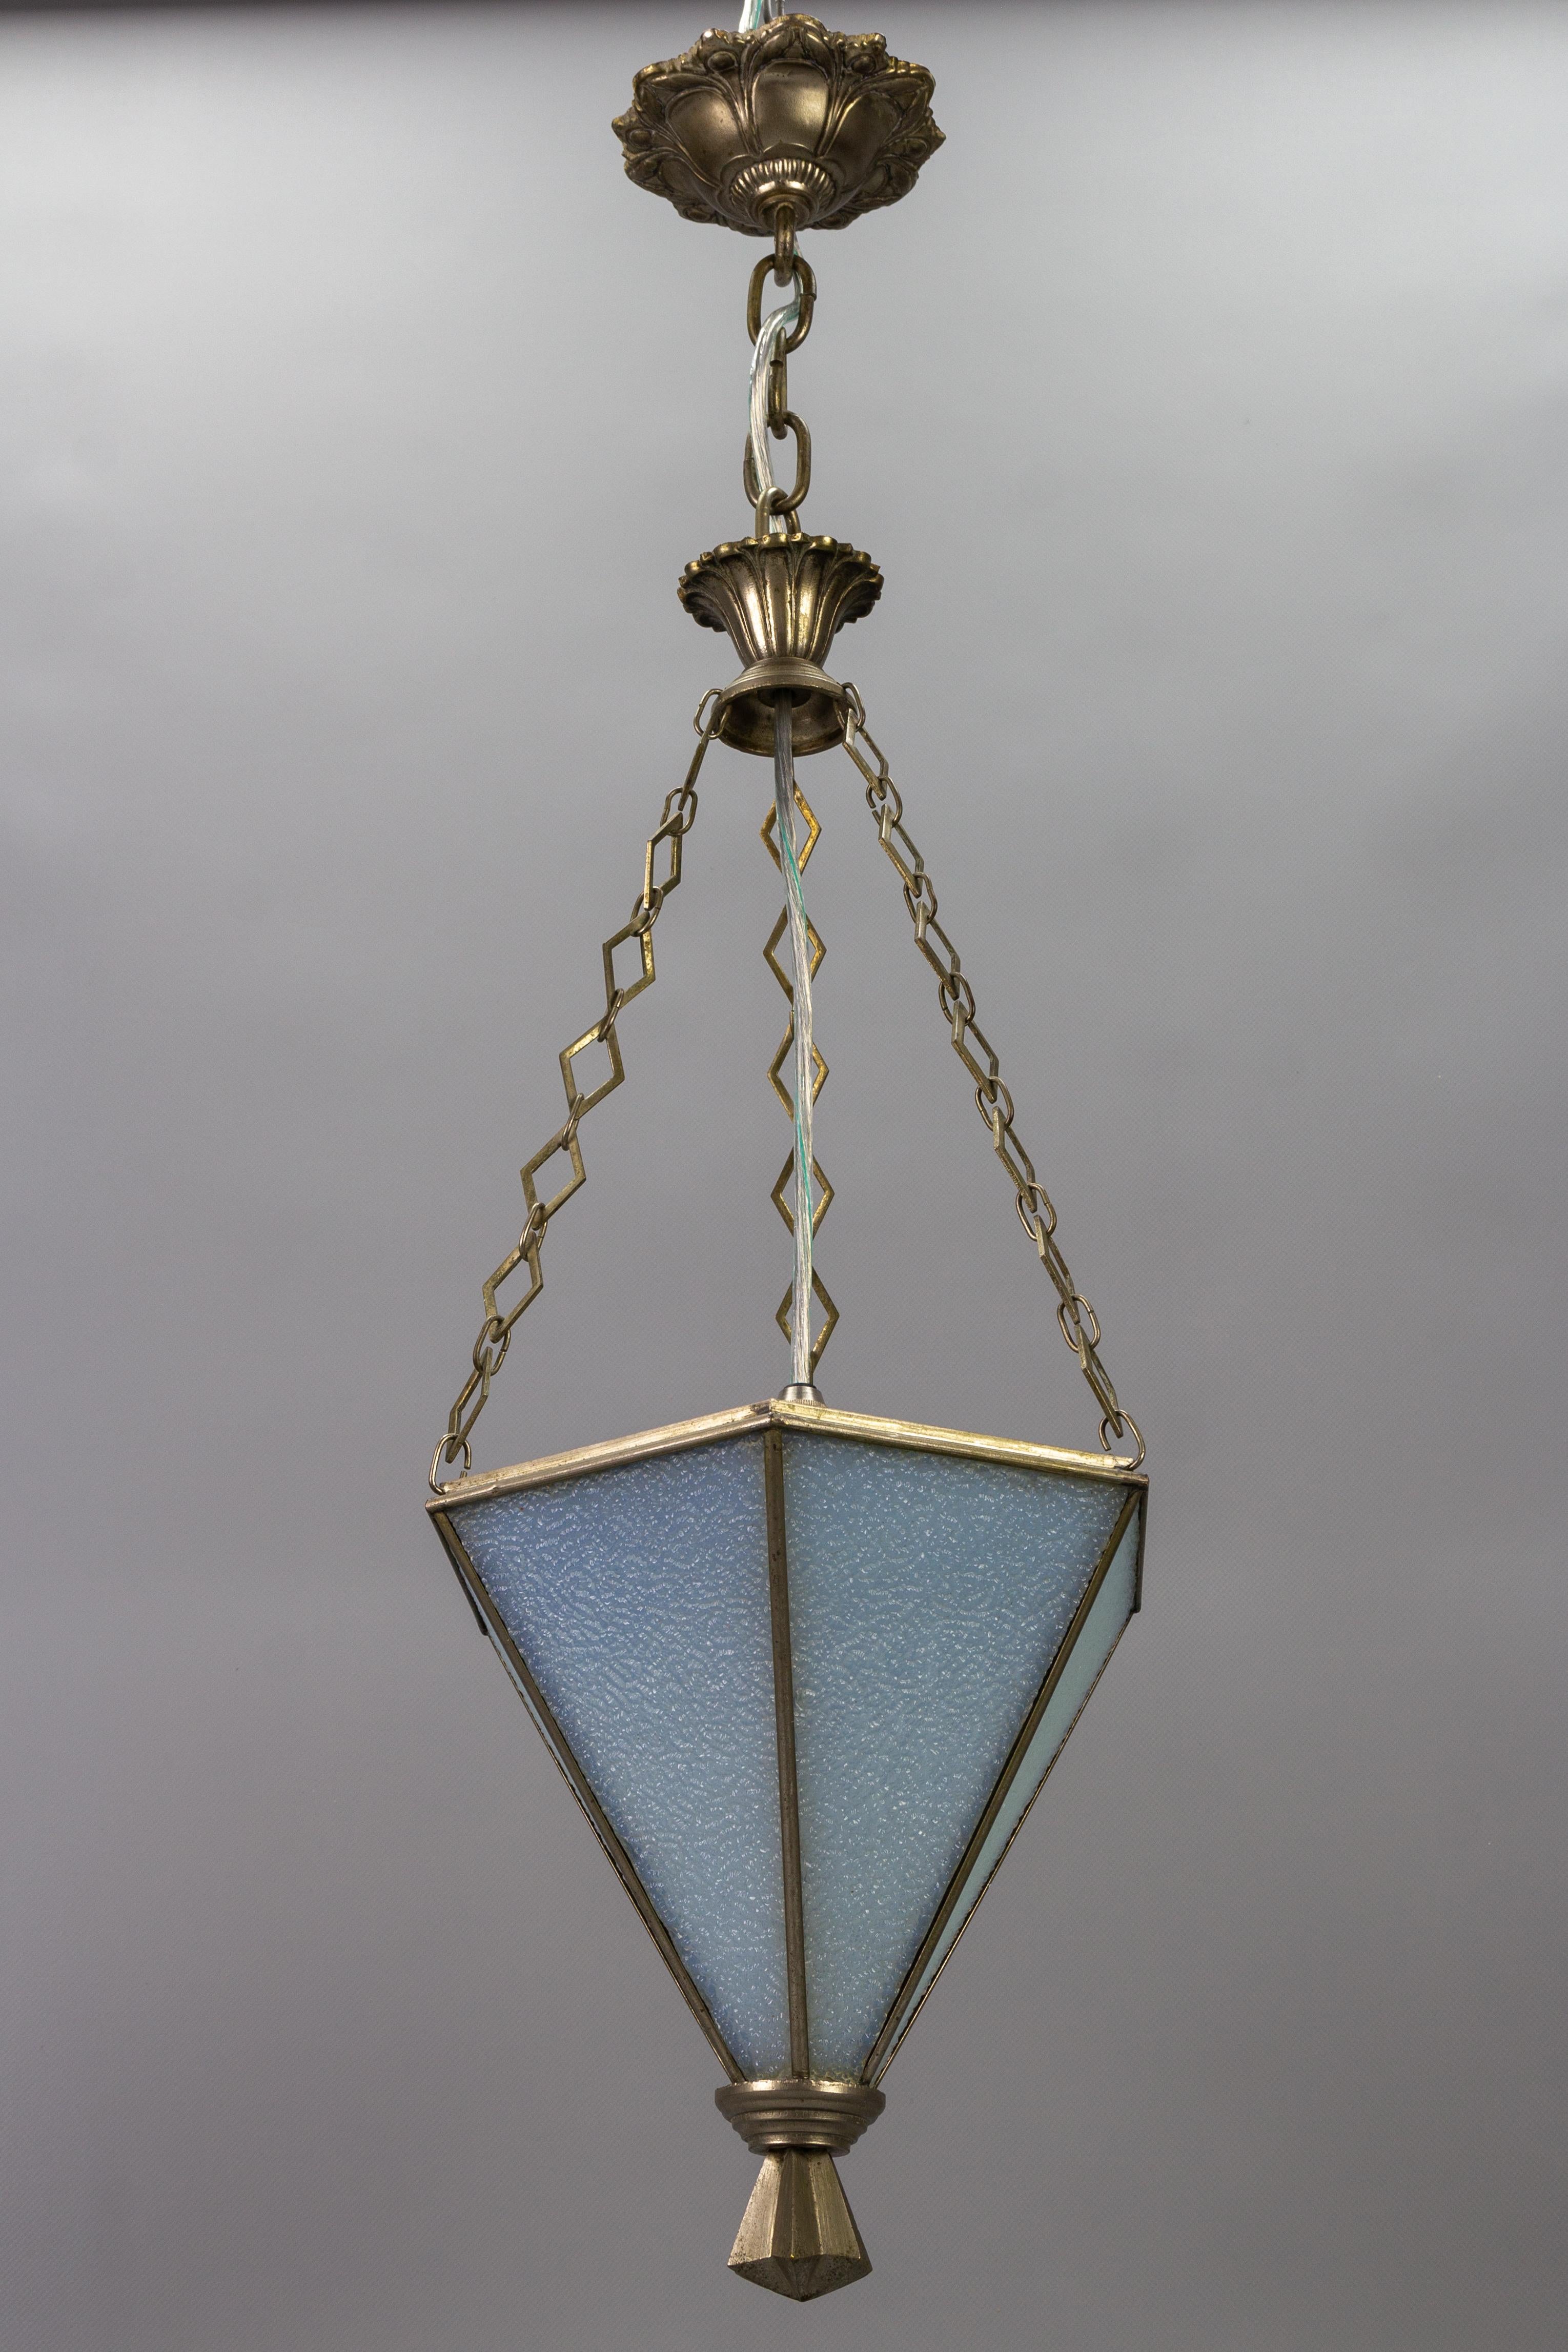 Wonderful French Art Deco pendant light with silver color brass hexagonal light fixture frame and six white frosted texture glass panels.
One socket for the E14 size light bulb.
Dimensions: height: 72 cm / 28.34 in; diameter: 24 cm / 9.44 in.
The